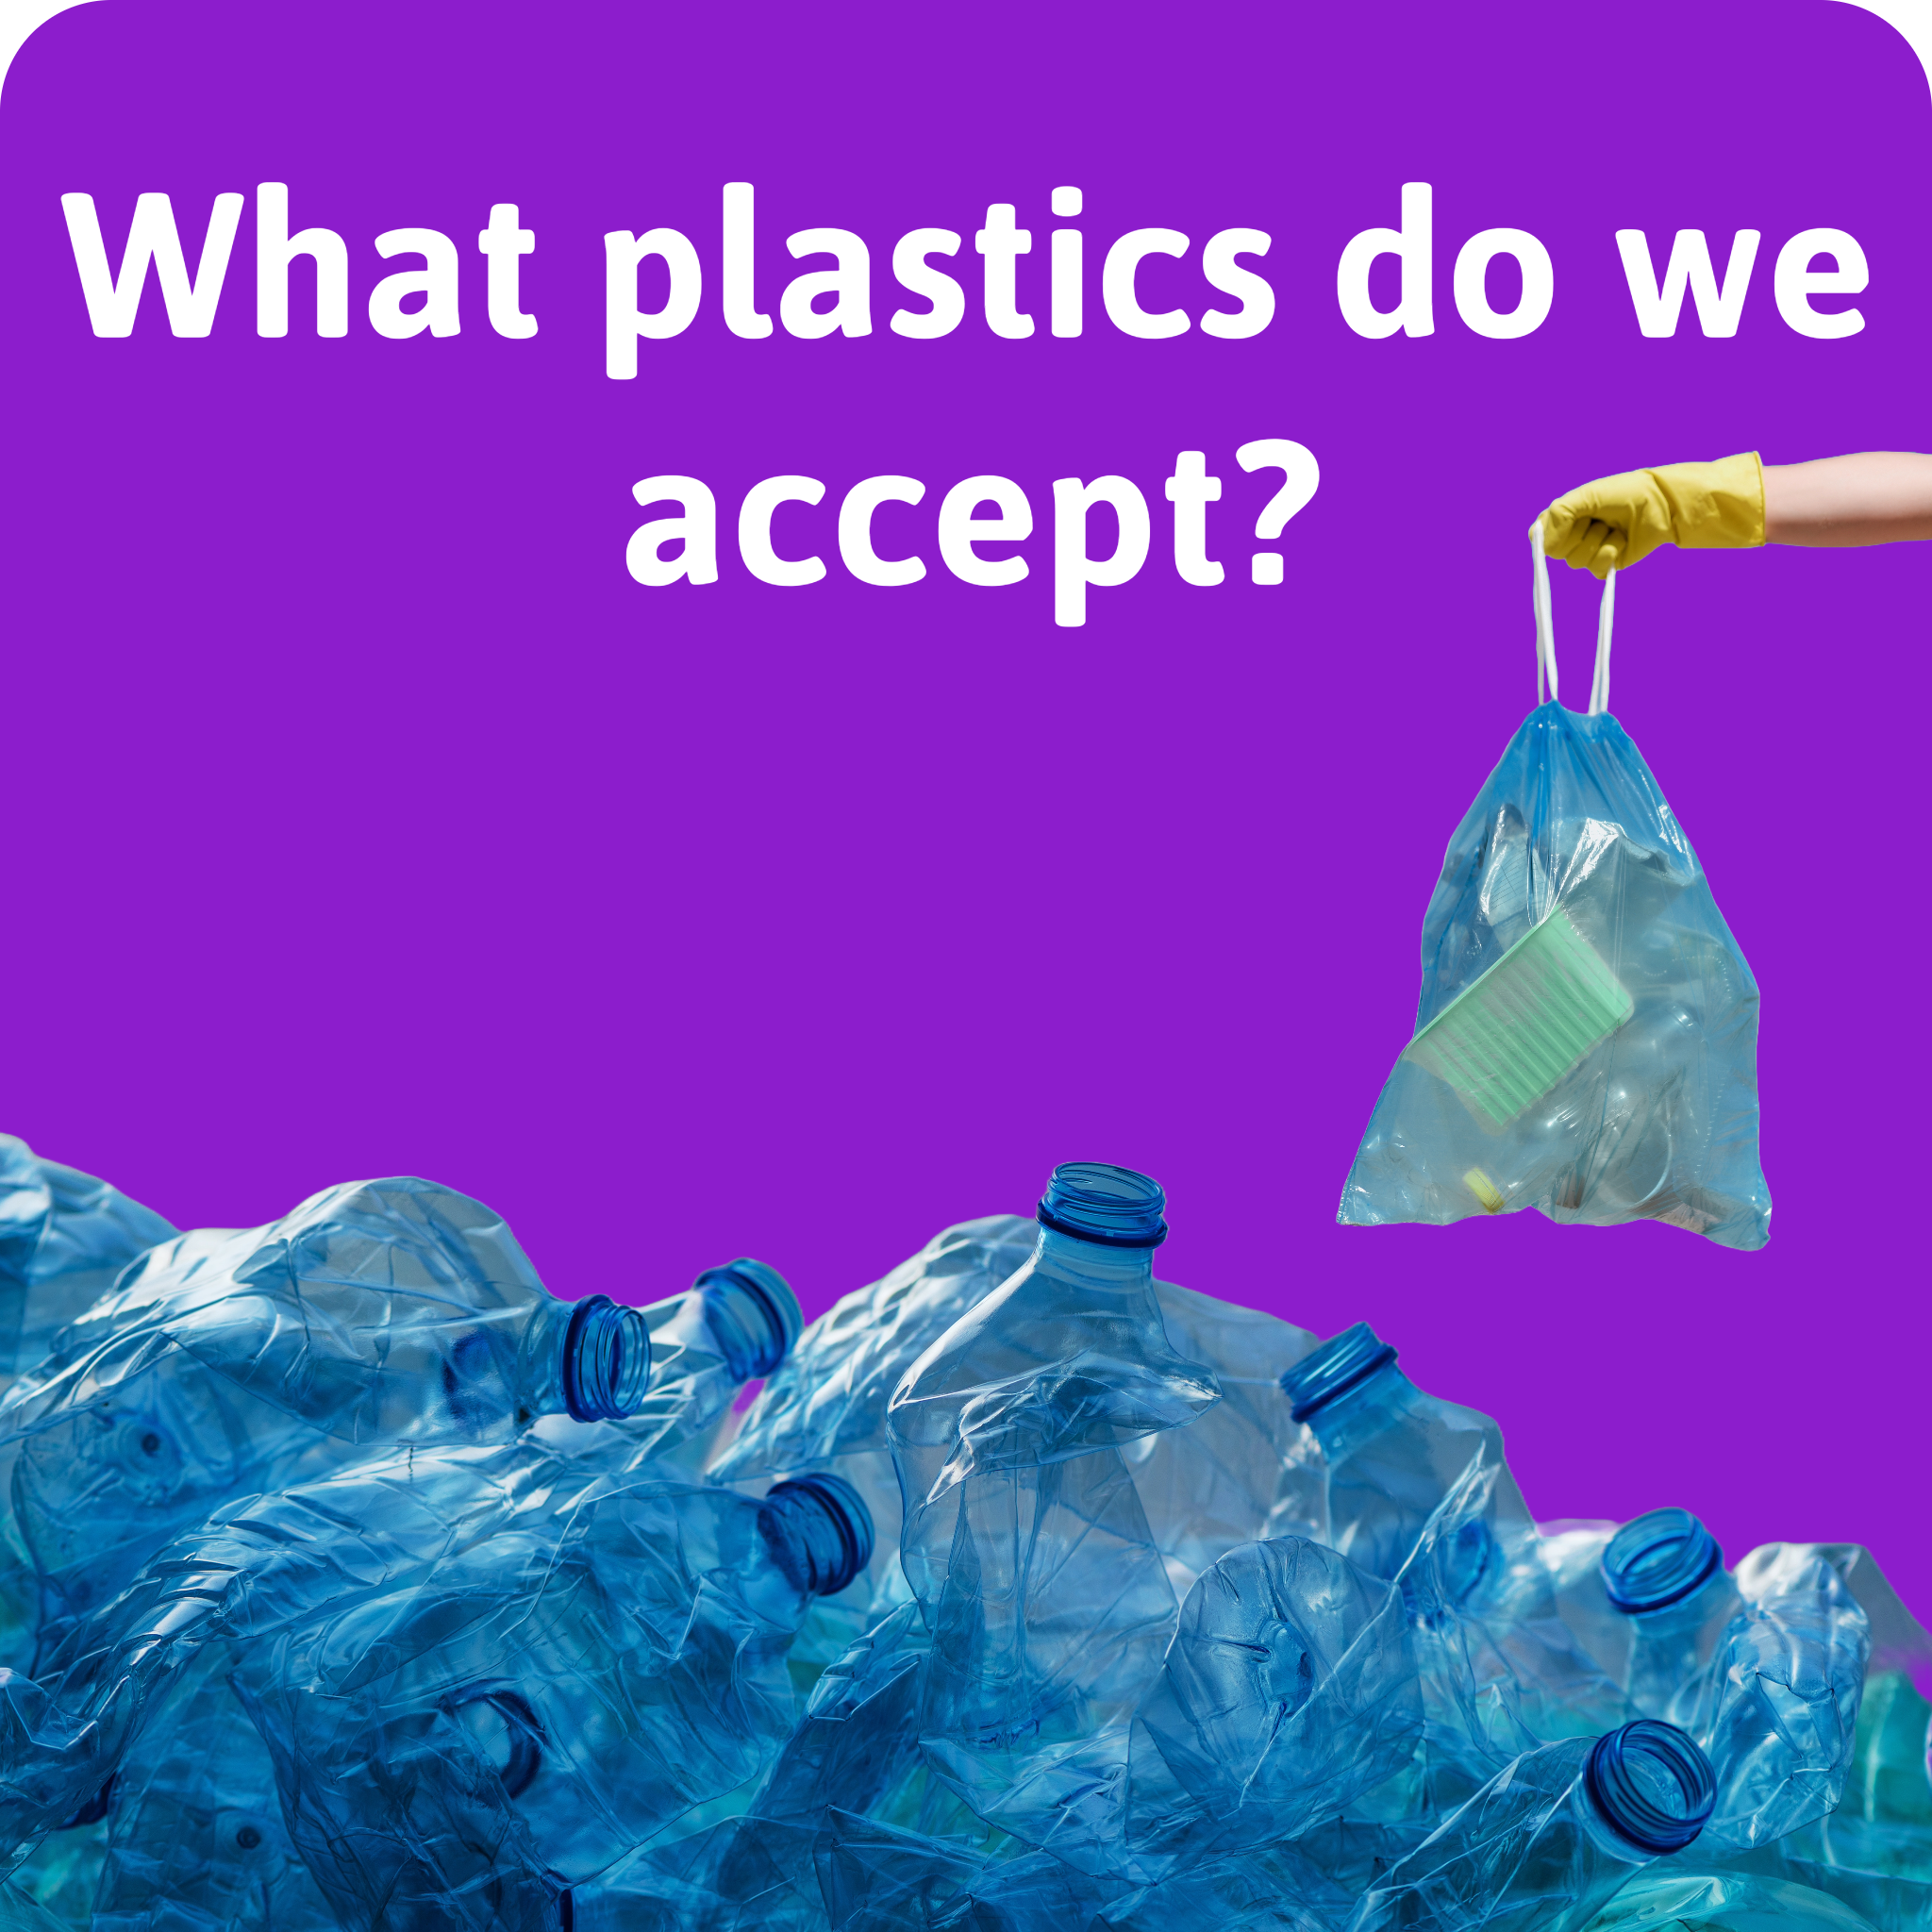 What plastics do we accept is the text on this image. White text over a purple background with plastic bottles piled on the bottom and a hand holding a plastic bag.